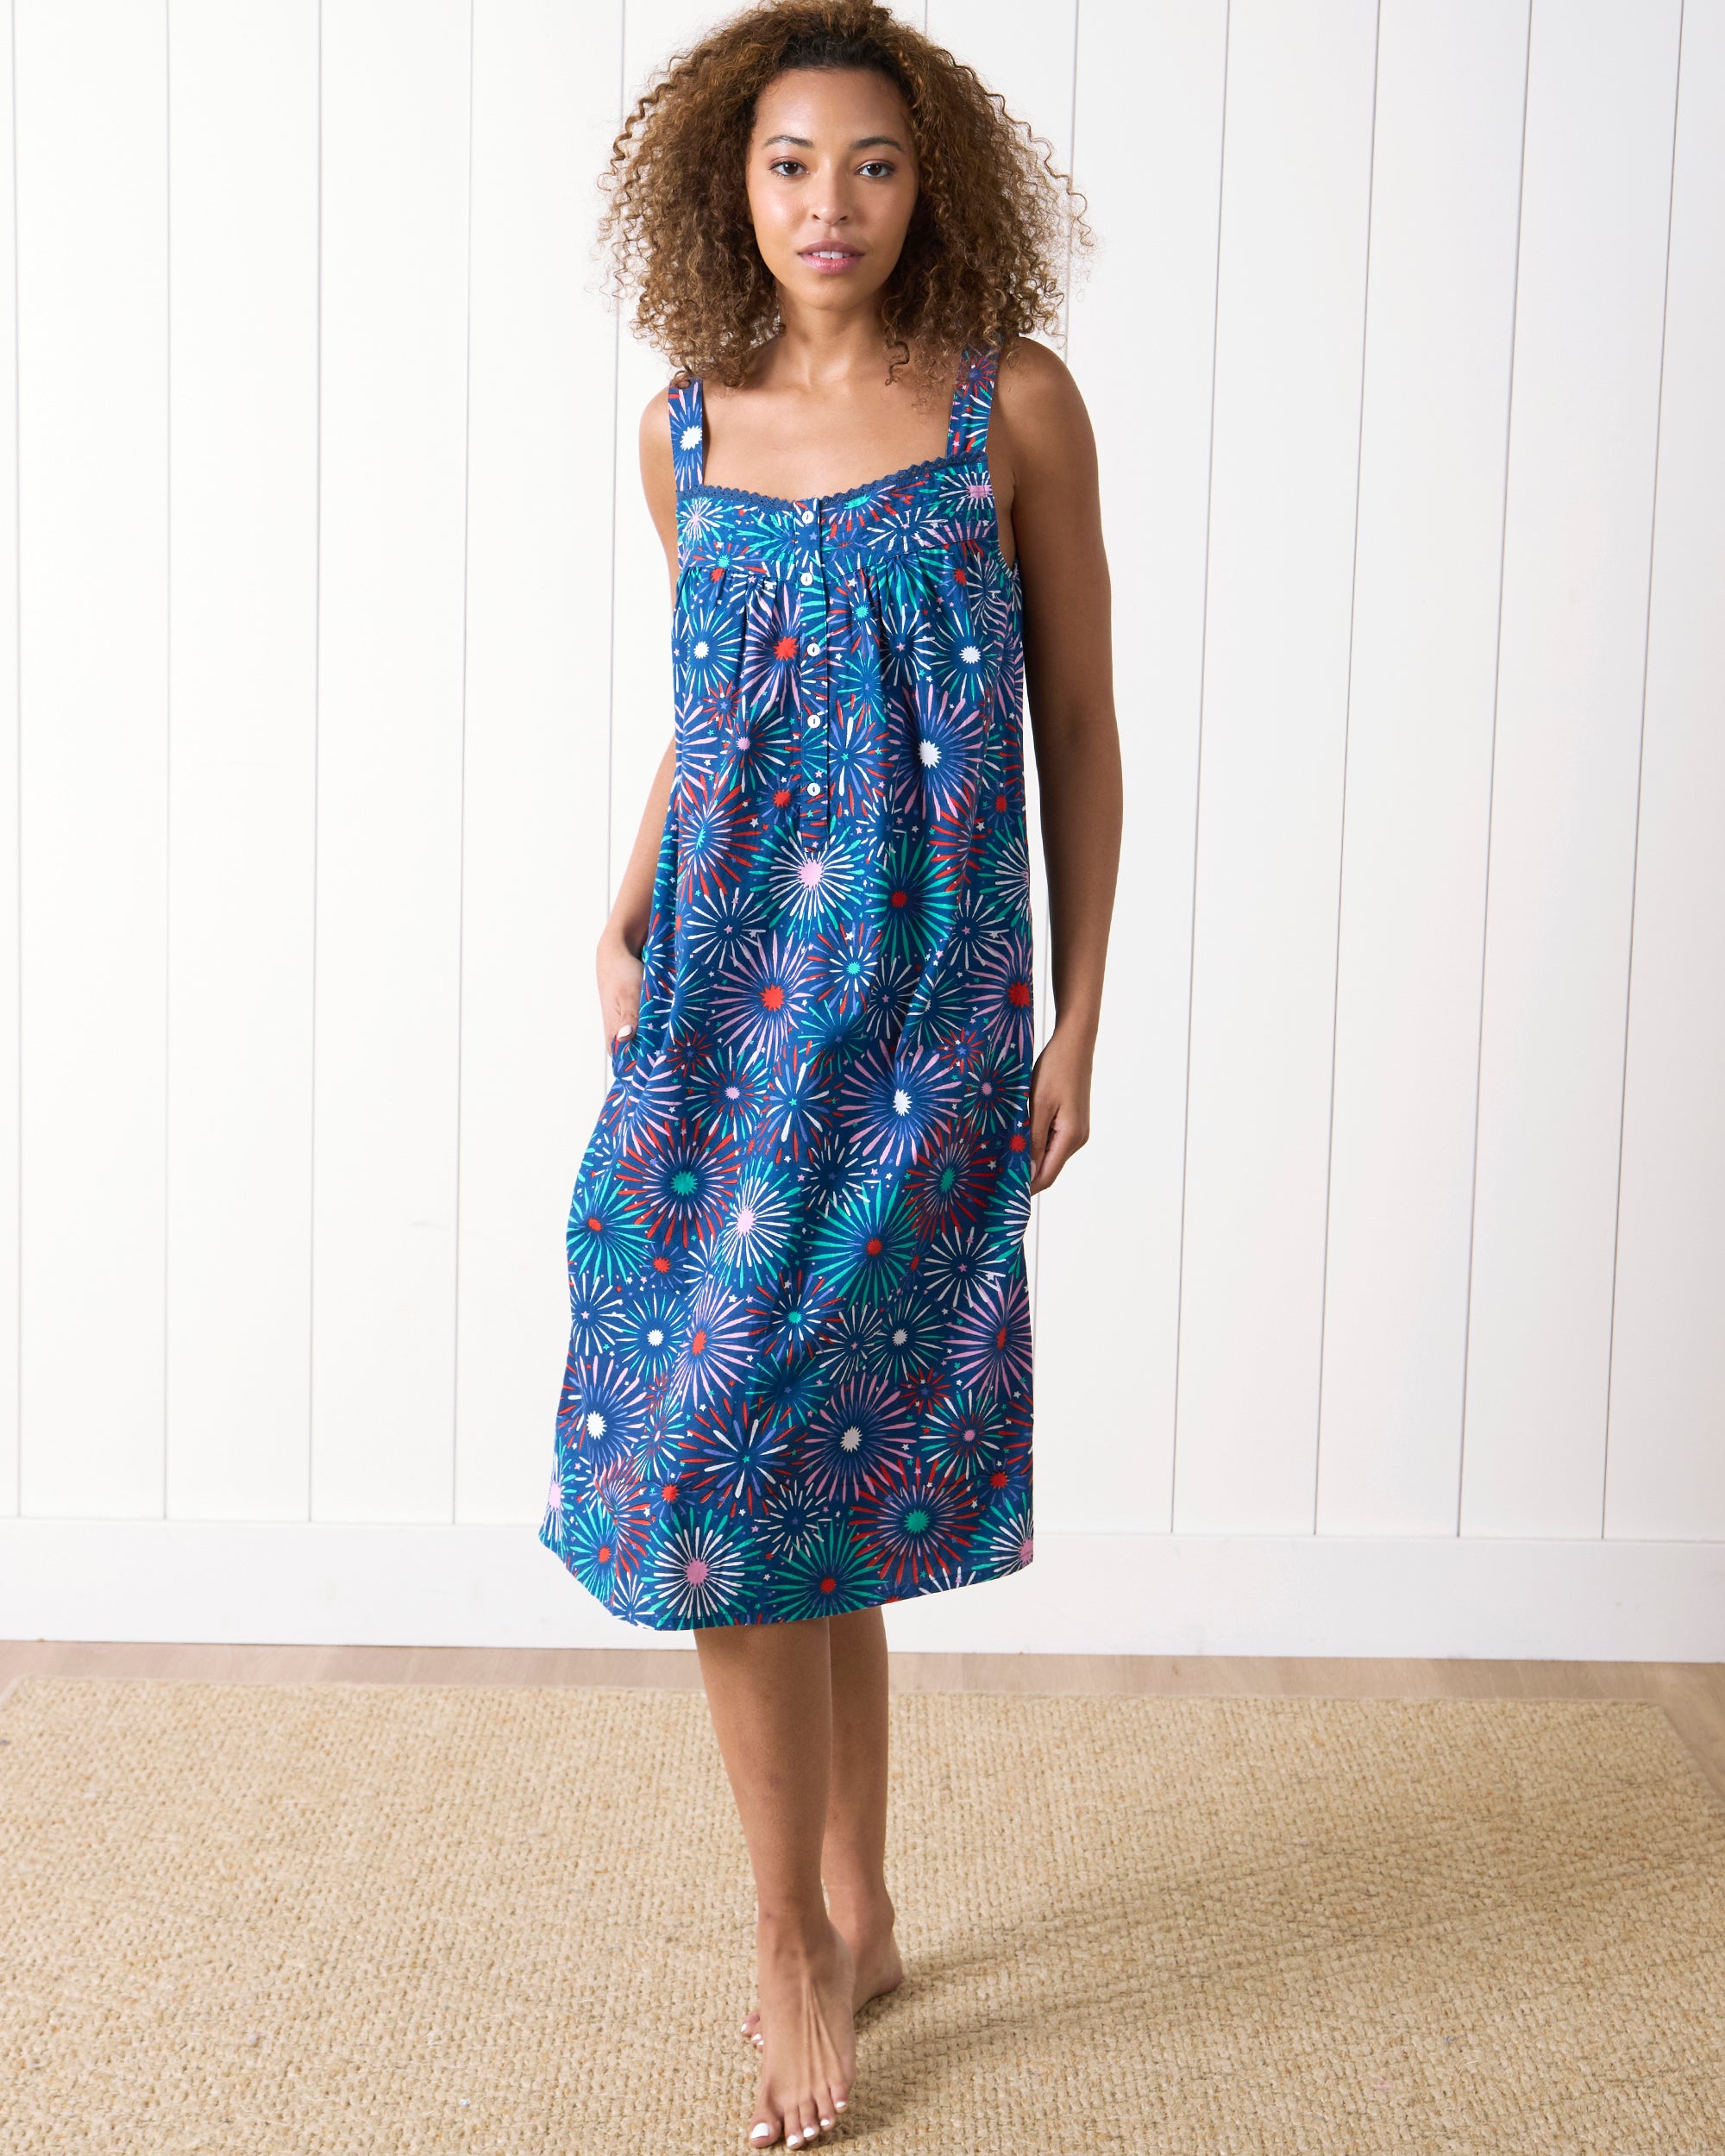 Sparks Fly - Back to Bed Nightgown - Navy - Printfresh